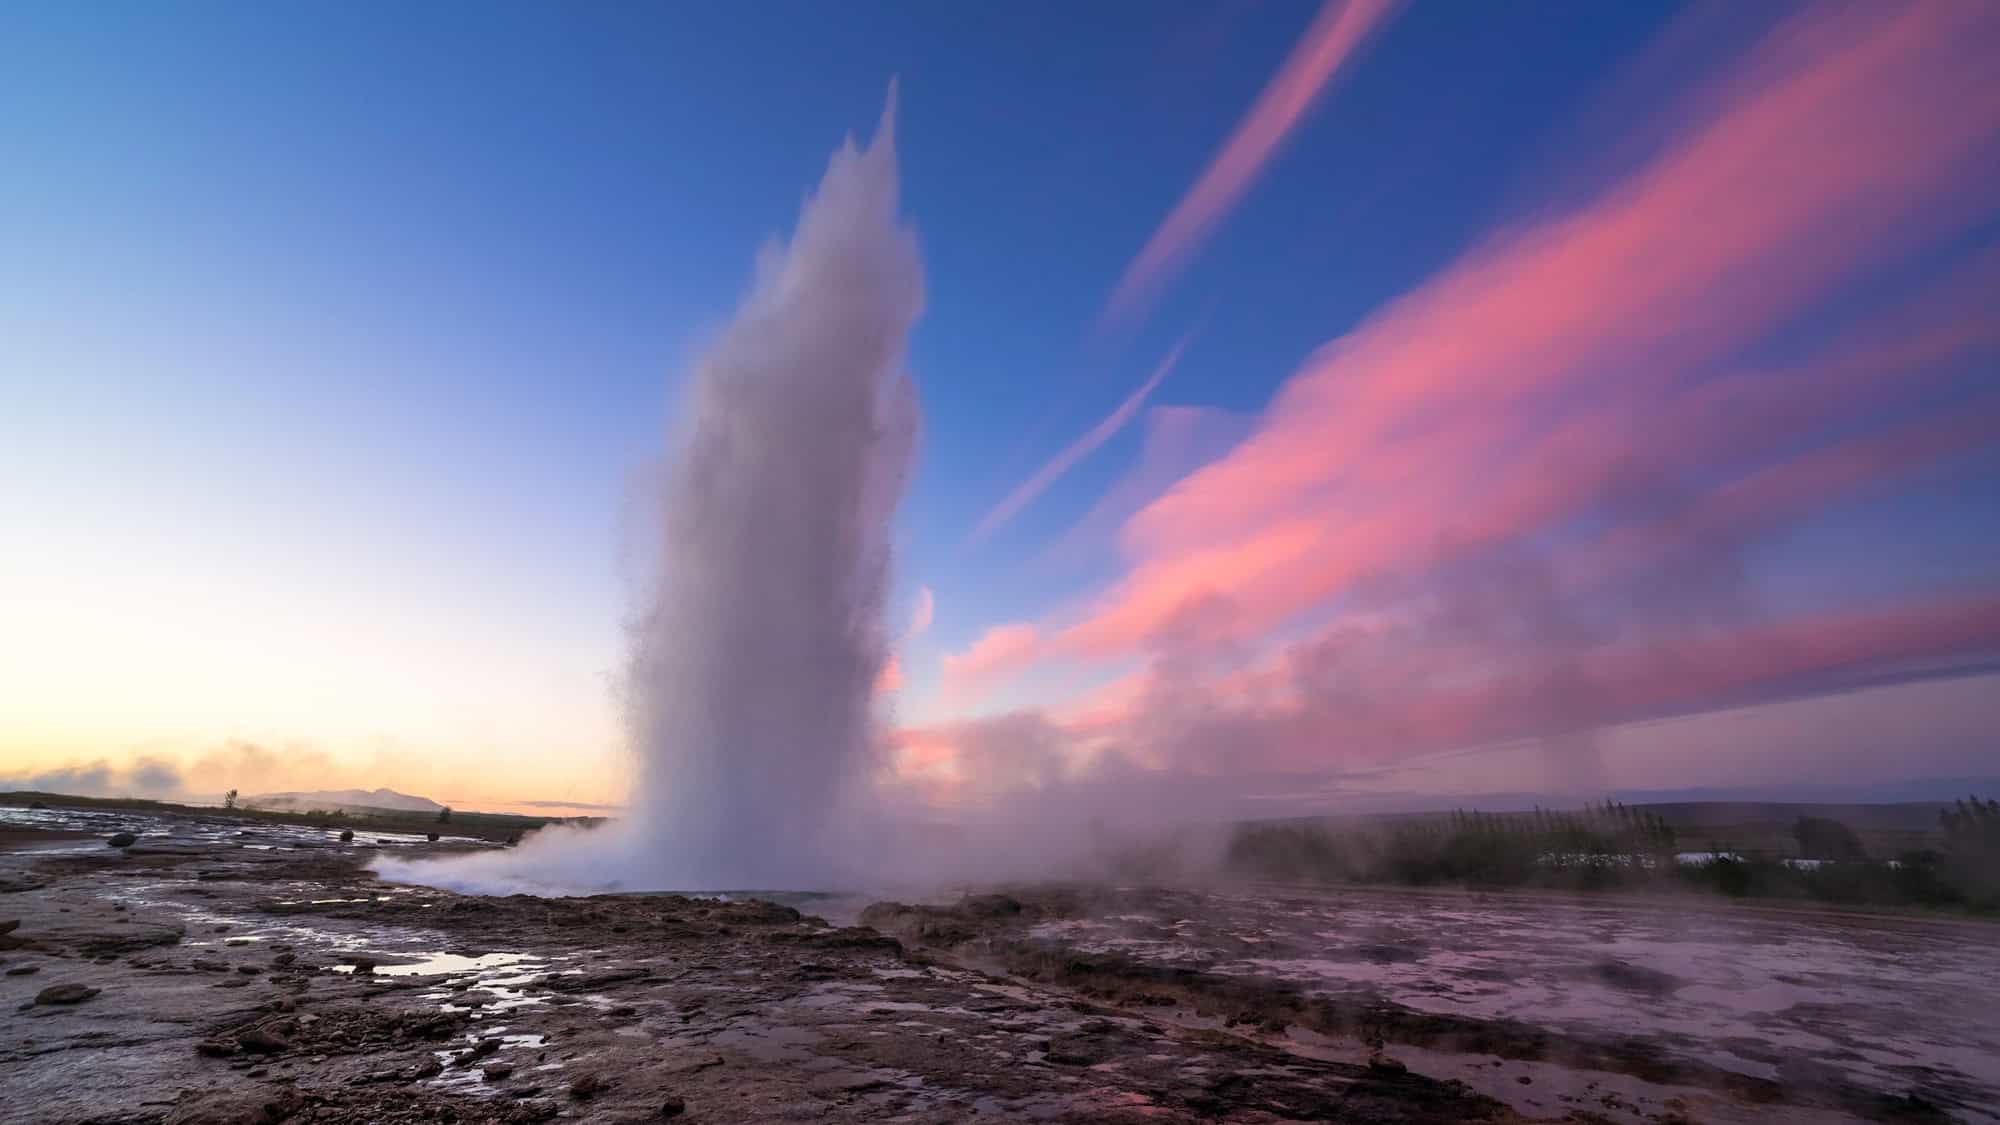 <p>Let’s talk geysers. In Iceland, they’re kind of a big deal, and the Geysir Geothermal Area is basically their MVP. <strong>Meet Strokkur, the star of the show, erupting every 5-10 minutes</strong> and launching boiling water up to 65 feet high. </p> <p>Timing that perfect shot can feel like trying to catch a popcorn kernel mid-air, but the results will make you look like a pro. It’s a splashy spectacle that’s totally worth the effort – <em>and yes, waiting for that precise moment can make you feel like a geyser paparazzi.</em></p> <div class="wp-block-kadence-iconlist kt-svg-icon-list-items kt-svg-icon-list-items4232_c57aff-78 kt-svg-icon-list-columns-1 alignnone"> <ul class="kt-svg-icon-list"> <li class="wp-block-kadence-listitem kt-svg-icon-list-item-wrap kt-svg-icon-list-item-4232_53efa6-cd"><span><strong>Best time to visit</strong>: Midday, for the best light to capture the eruption.</span></li> </ul> </div>